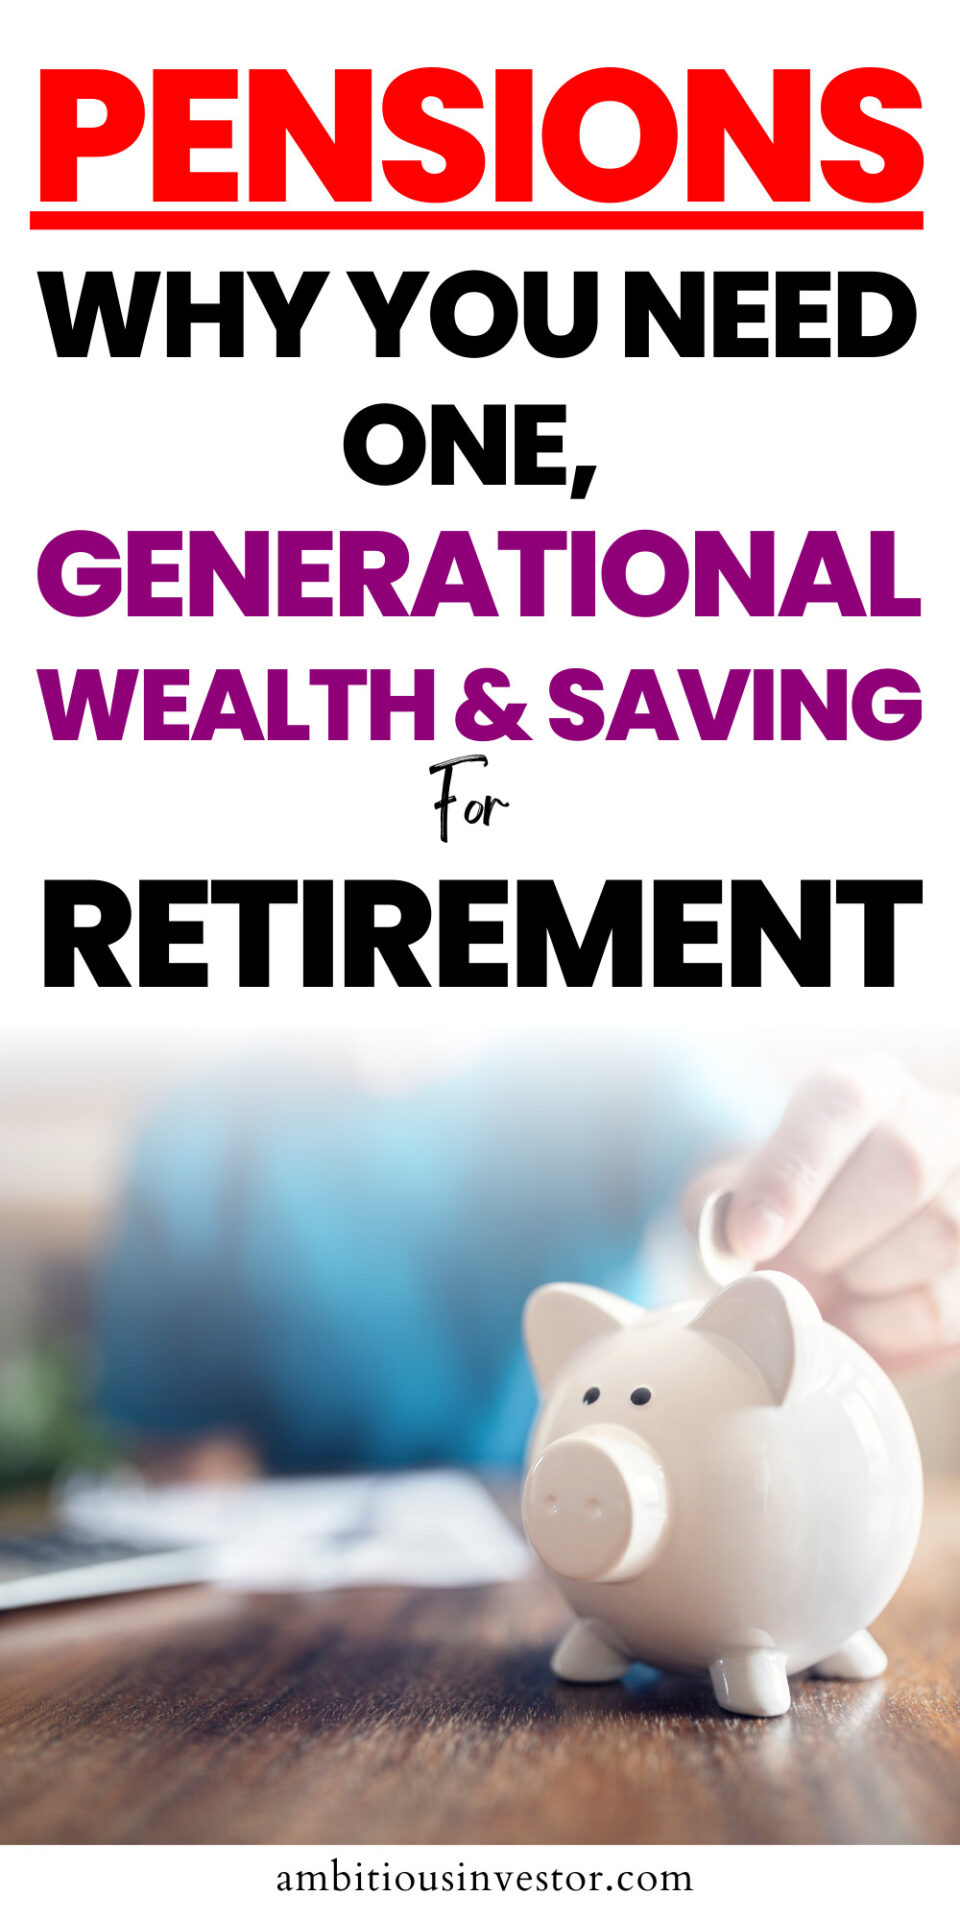 Pensions- Why You Need One, Generational Wealth & Saving For Retirement